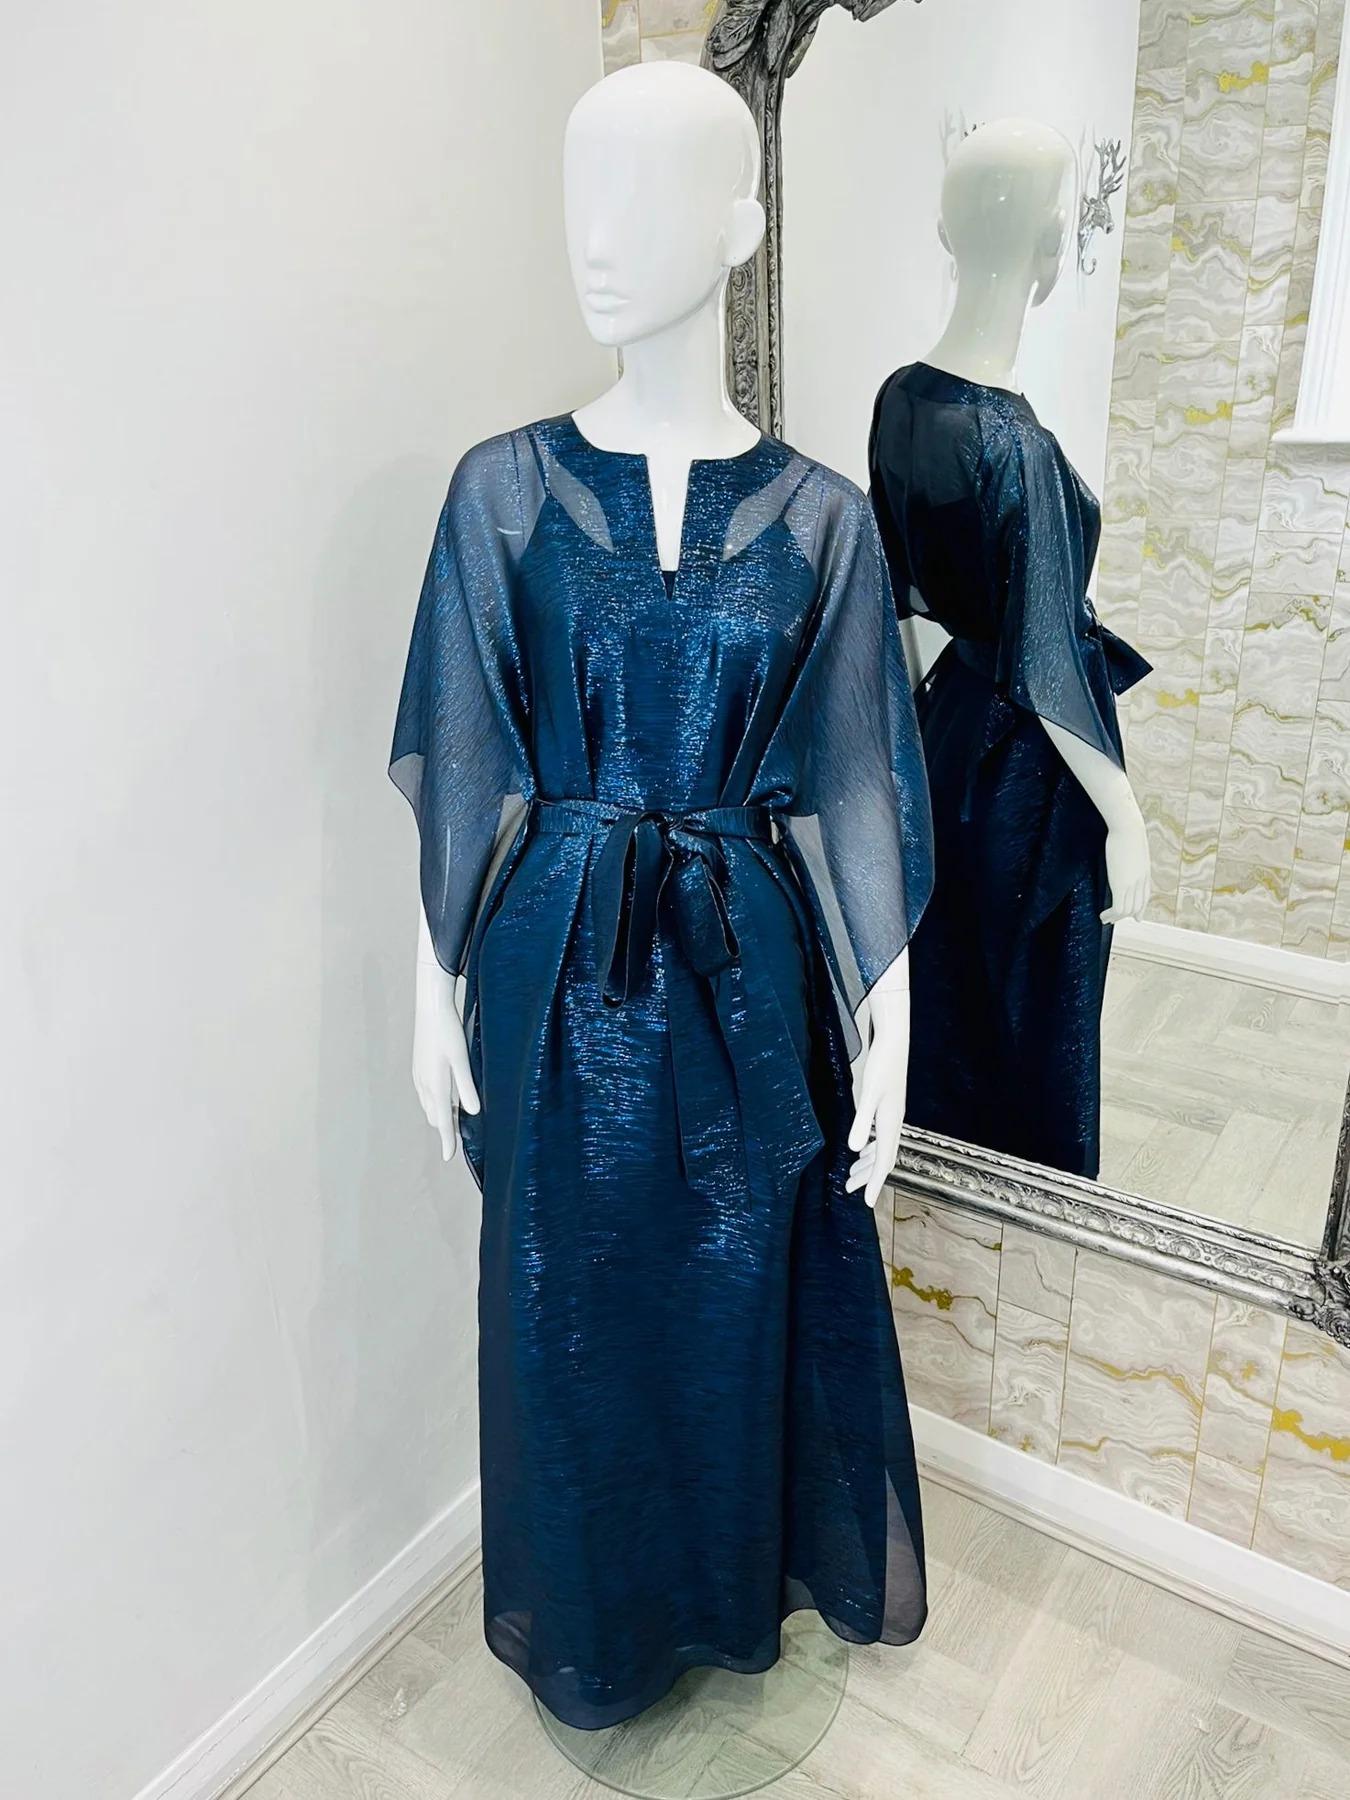 Oscar De La Renta Metallic Silk Evening Dress

Navy blue, with almost silver threads, maxi evening gown, with ruffle sides and self tie, belted waist. Sheer dress with matching slip. 

Additional information:
Size – M
Composition – 70% Silk, 30%